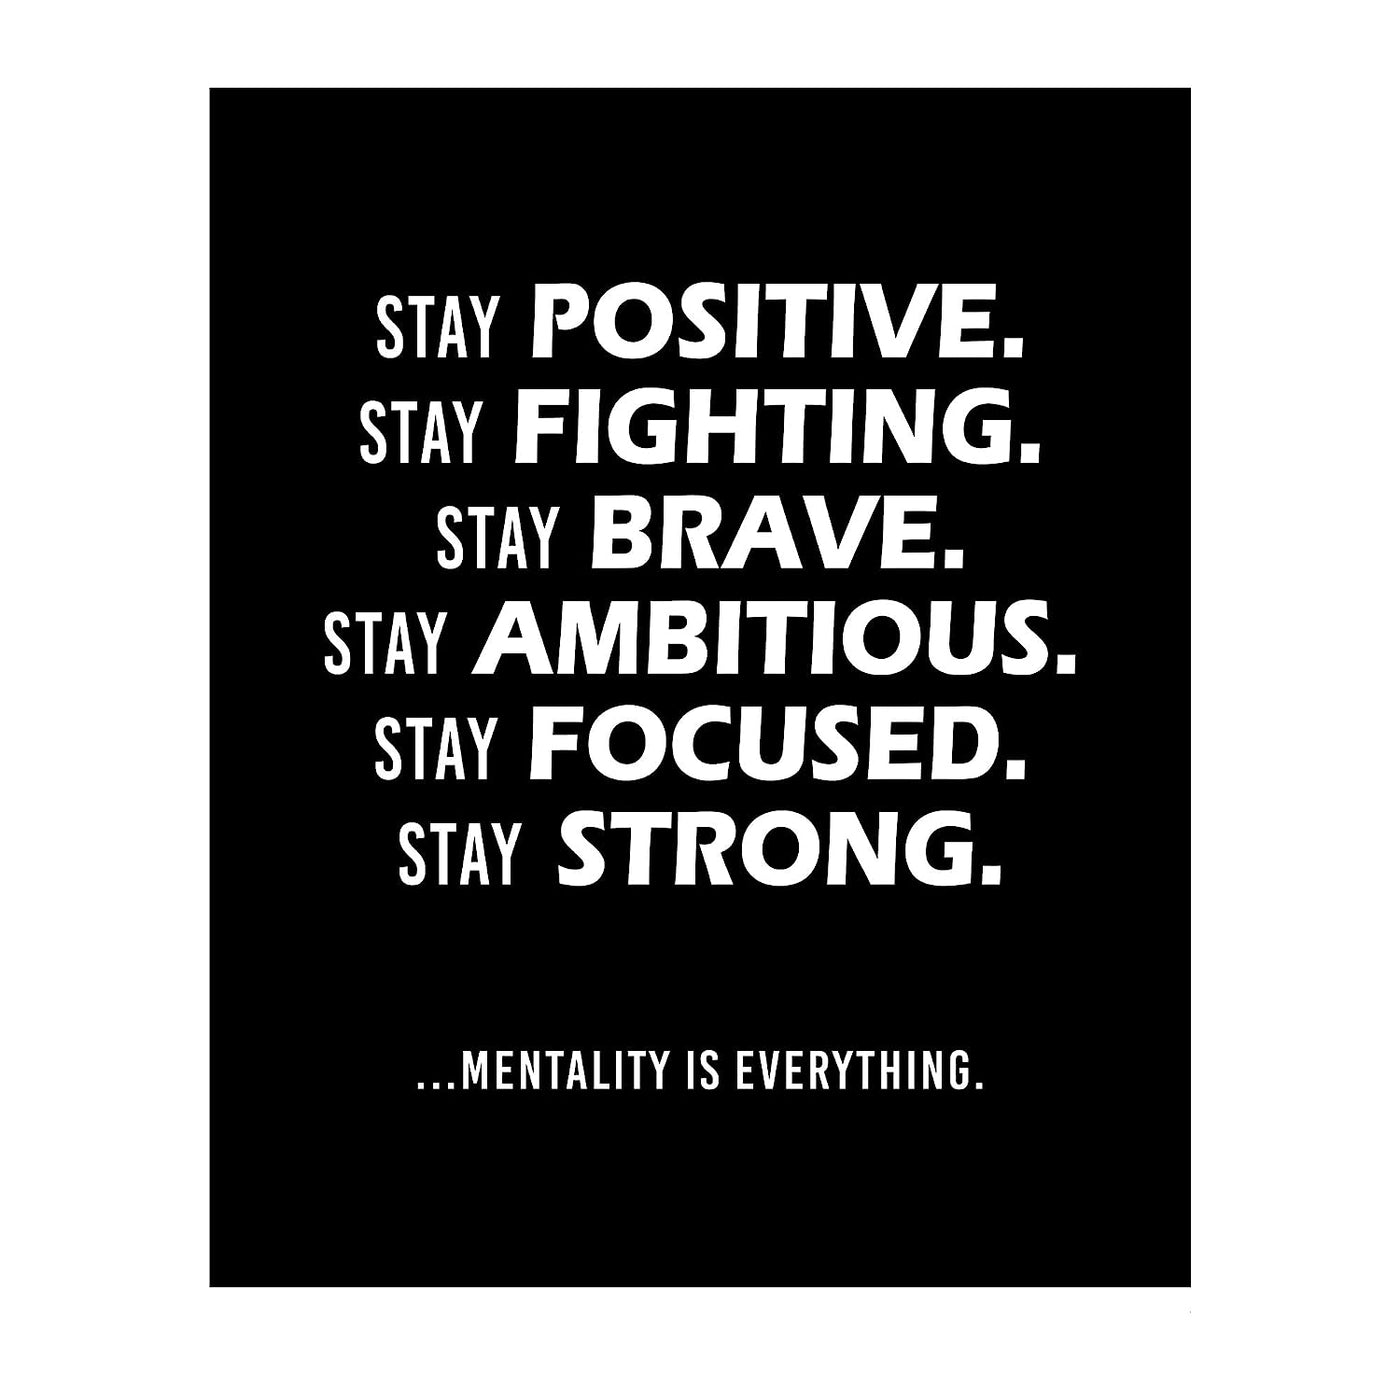 Stay Positive-Mentality Is Everything-Life Quotes Wall Art-8 x 10" Motivational Poster Print-Ready To Frame. Inspirational Home-Office-Classroom Decor. Perfect Desk Sign! Reminder-Be Positive!